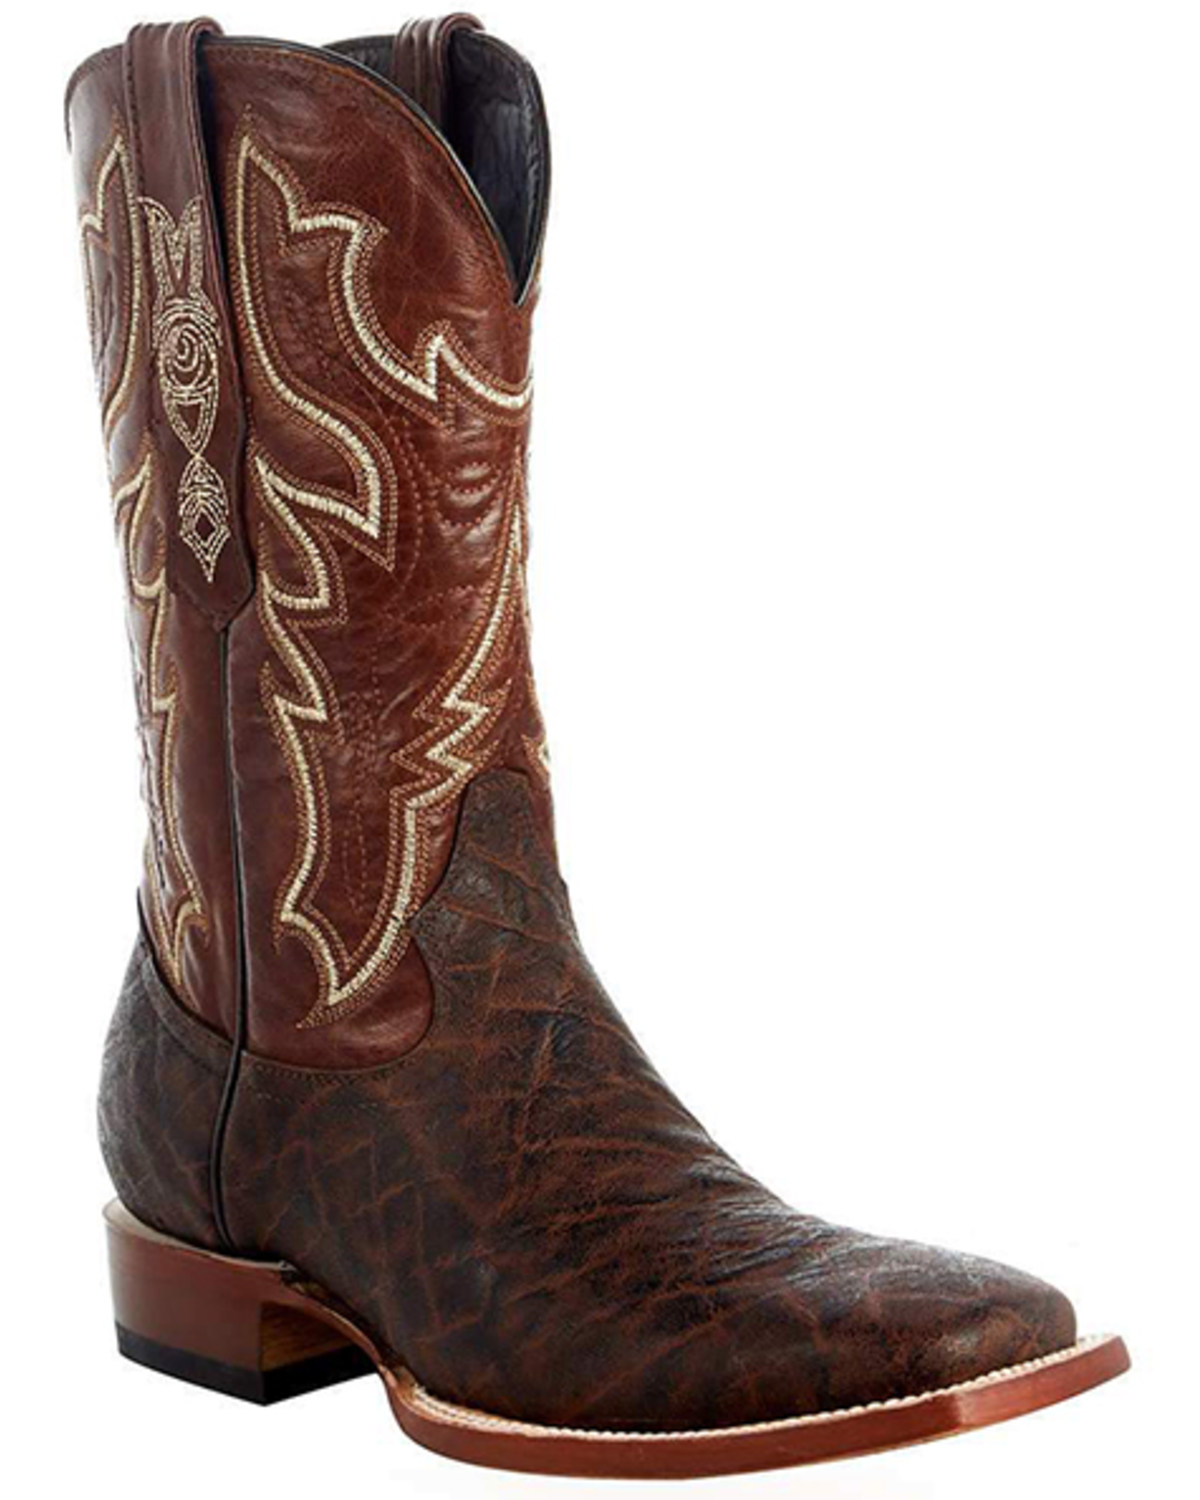 Tanner Mark Men's Elephant Print Western Boots - Broad Square Toe